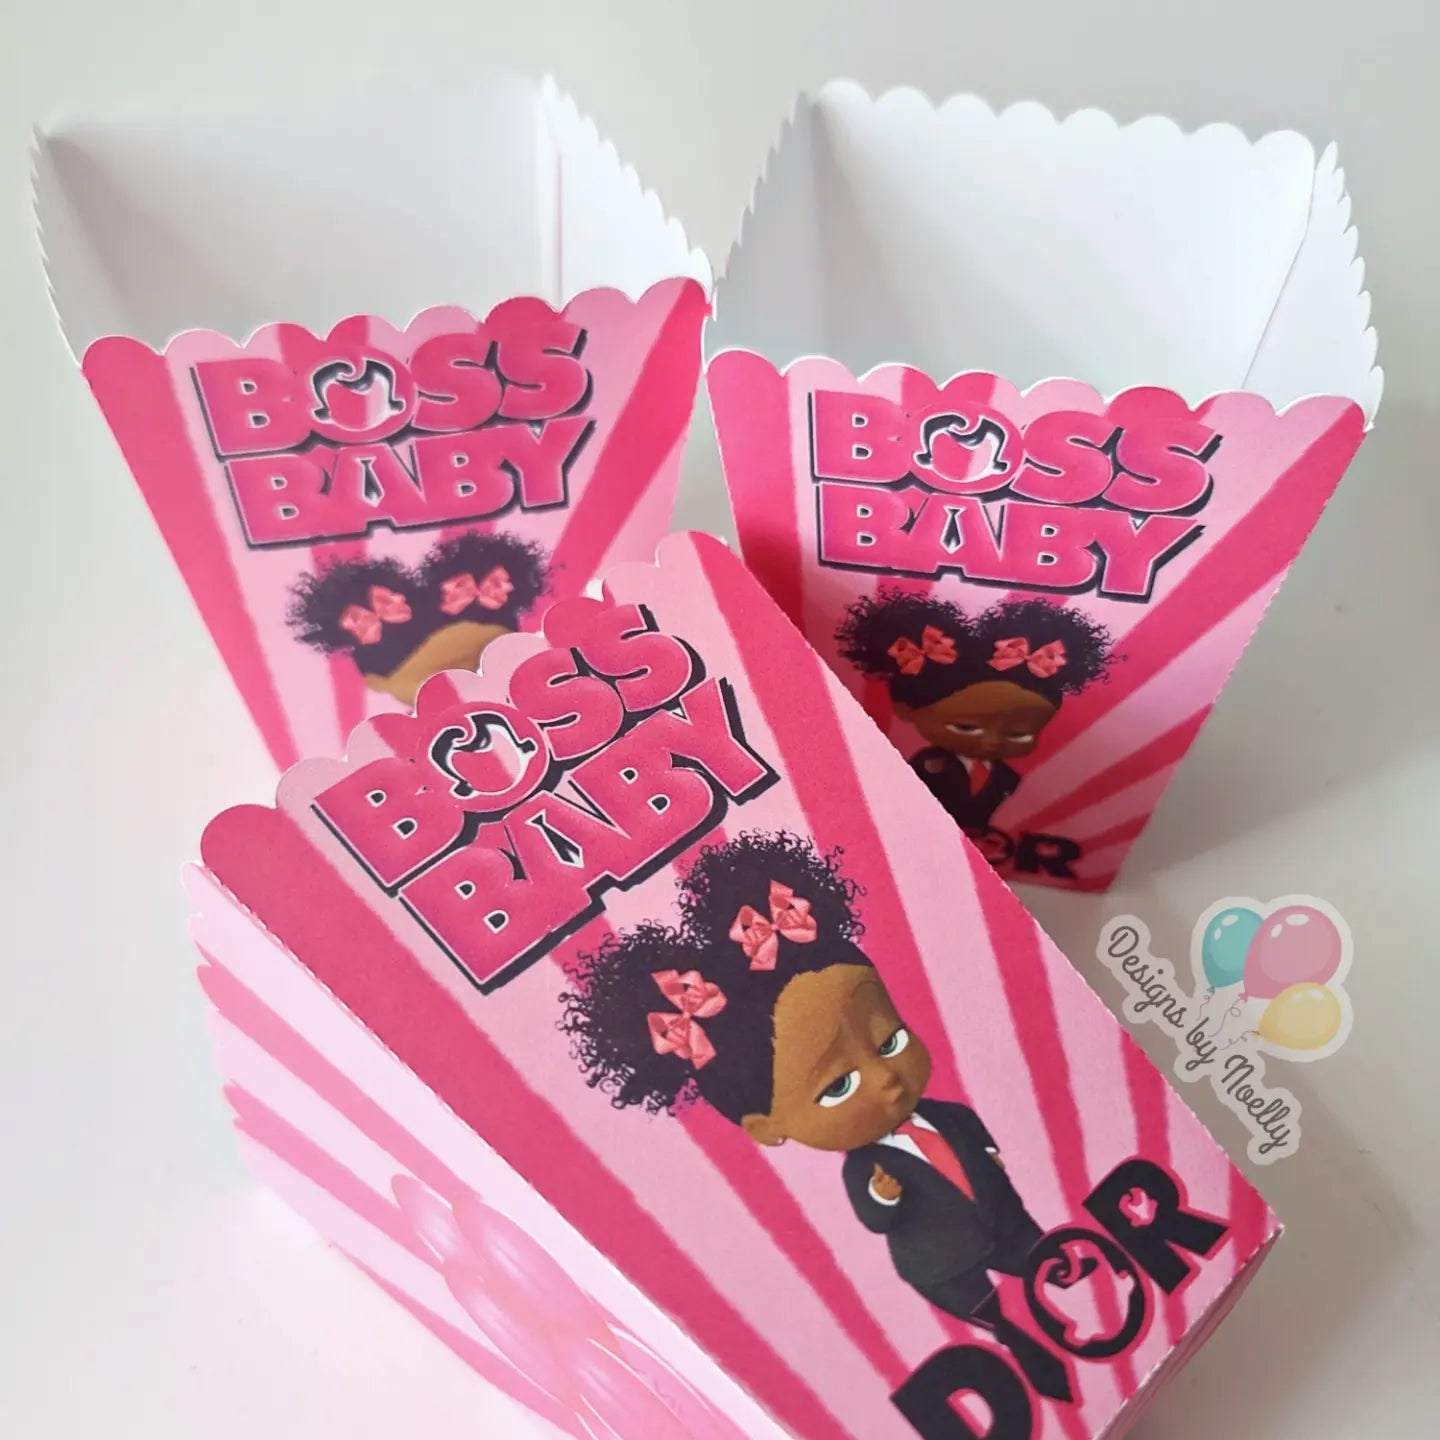 Boss Baby Pink Party Favors